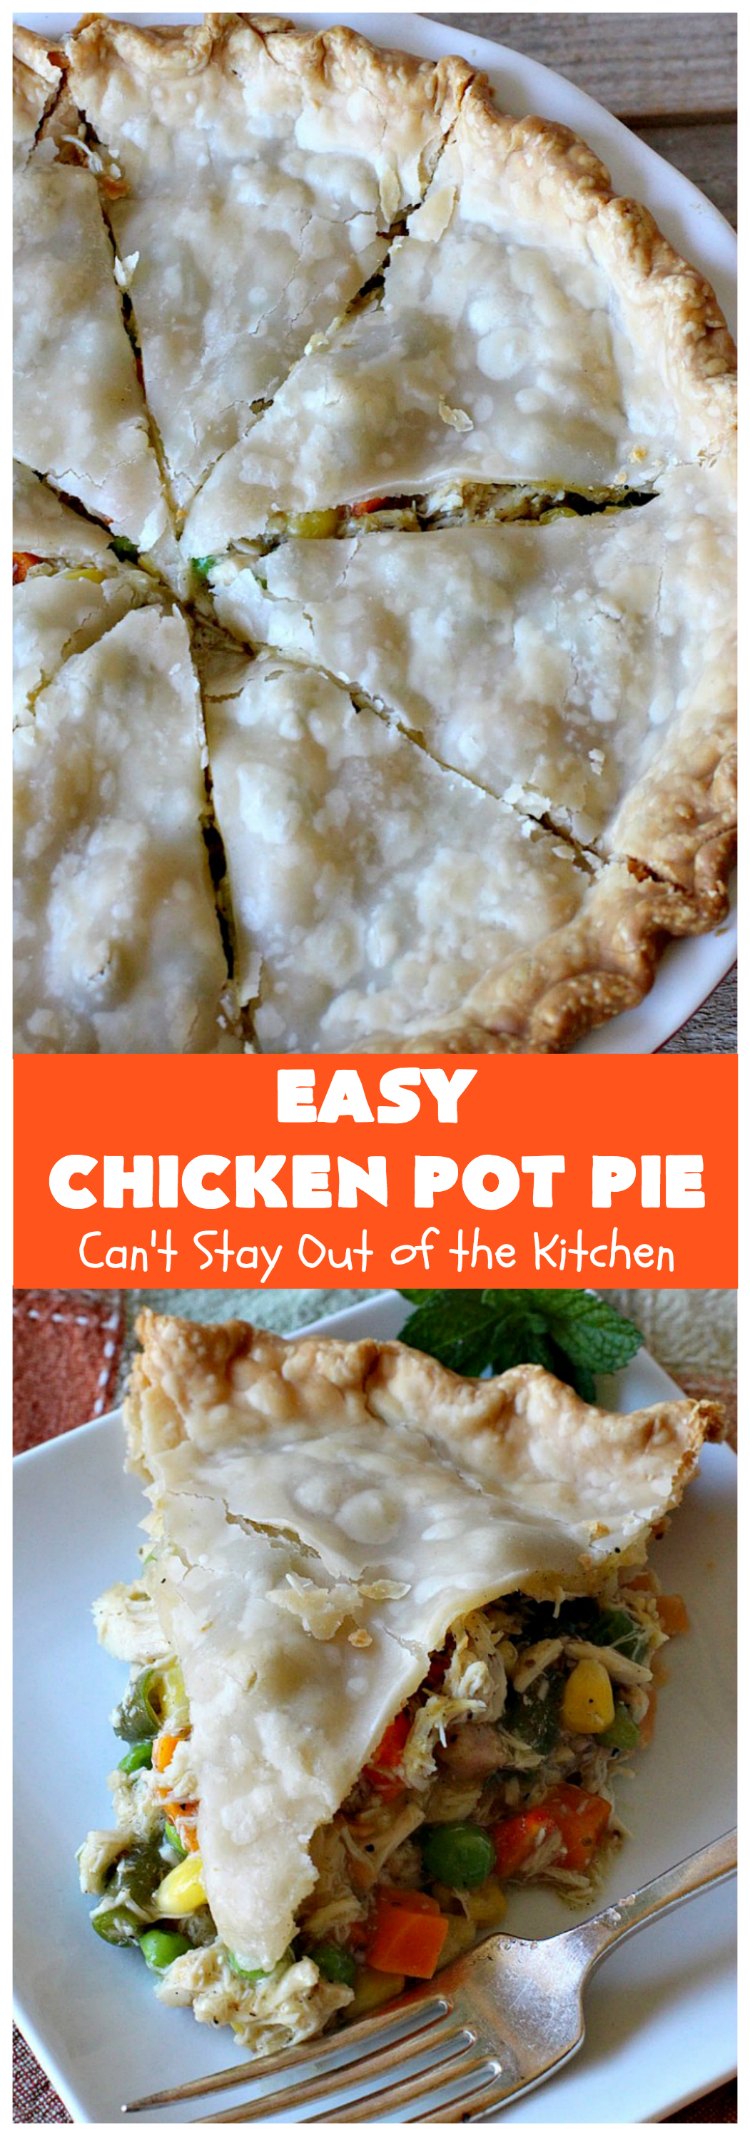 Easy Chicken Pot Pie | Can't Stay Out of the Kitchen | this delightful #GooseberryPatch #recipe uses only 7 ingredients! It takes 10 minutes to prepare & 45 minutes to bake. Perfect for company or #holiday dinners. Easiest #ChickenPotPie you'll ever make. #PotPie #EasyChickenPotPie #Chicken